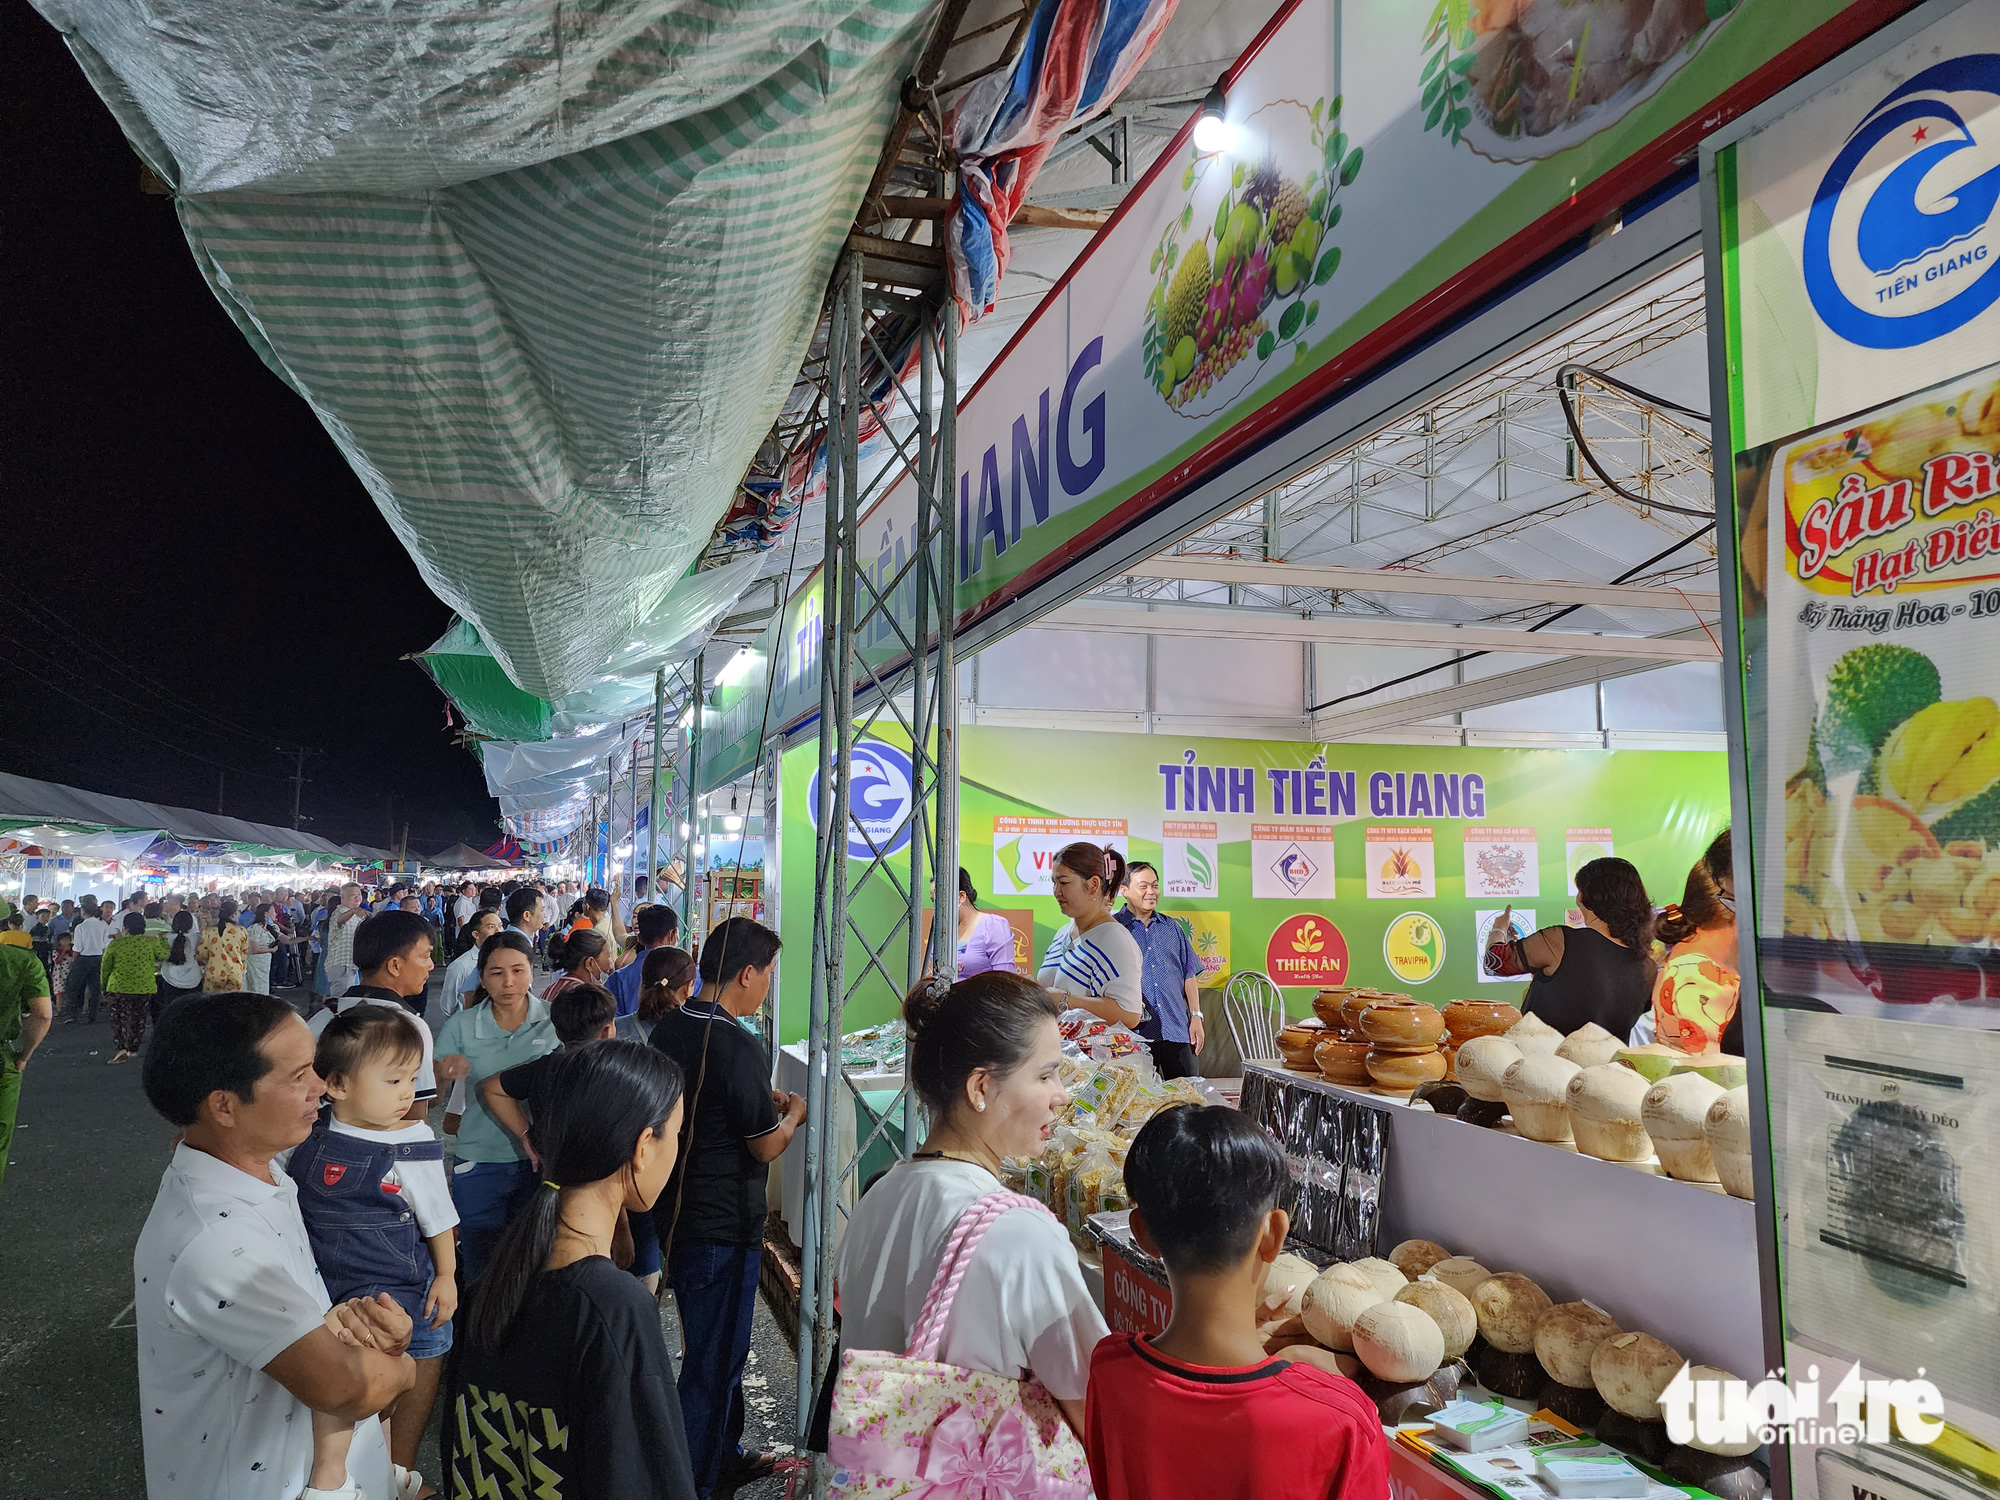 Thousands of visitors flock to a trade fair in An Giang Province, southern Vietnam, June 6, 2023. Photo: Buu Dau / Tuoi Tre